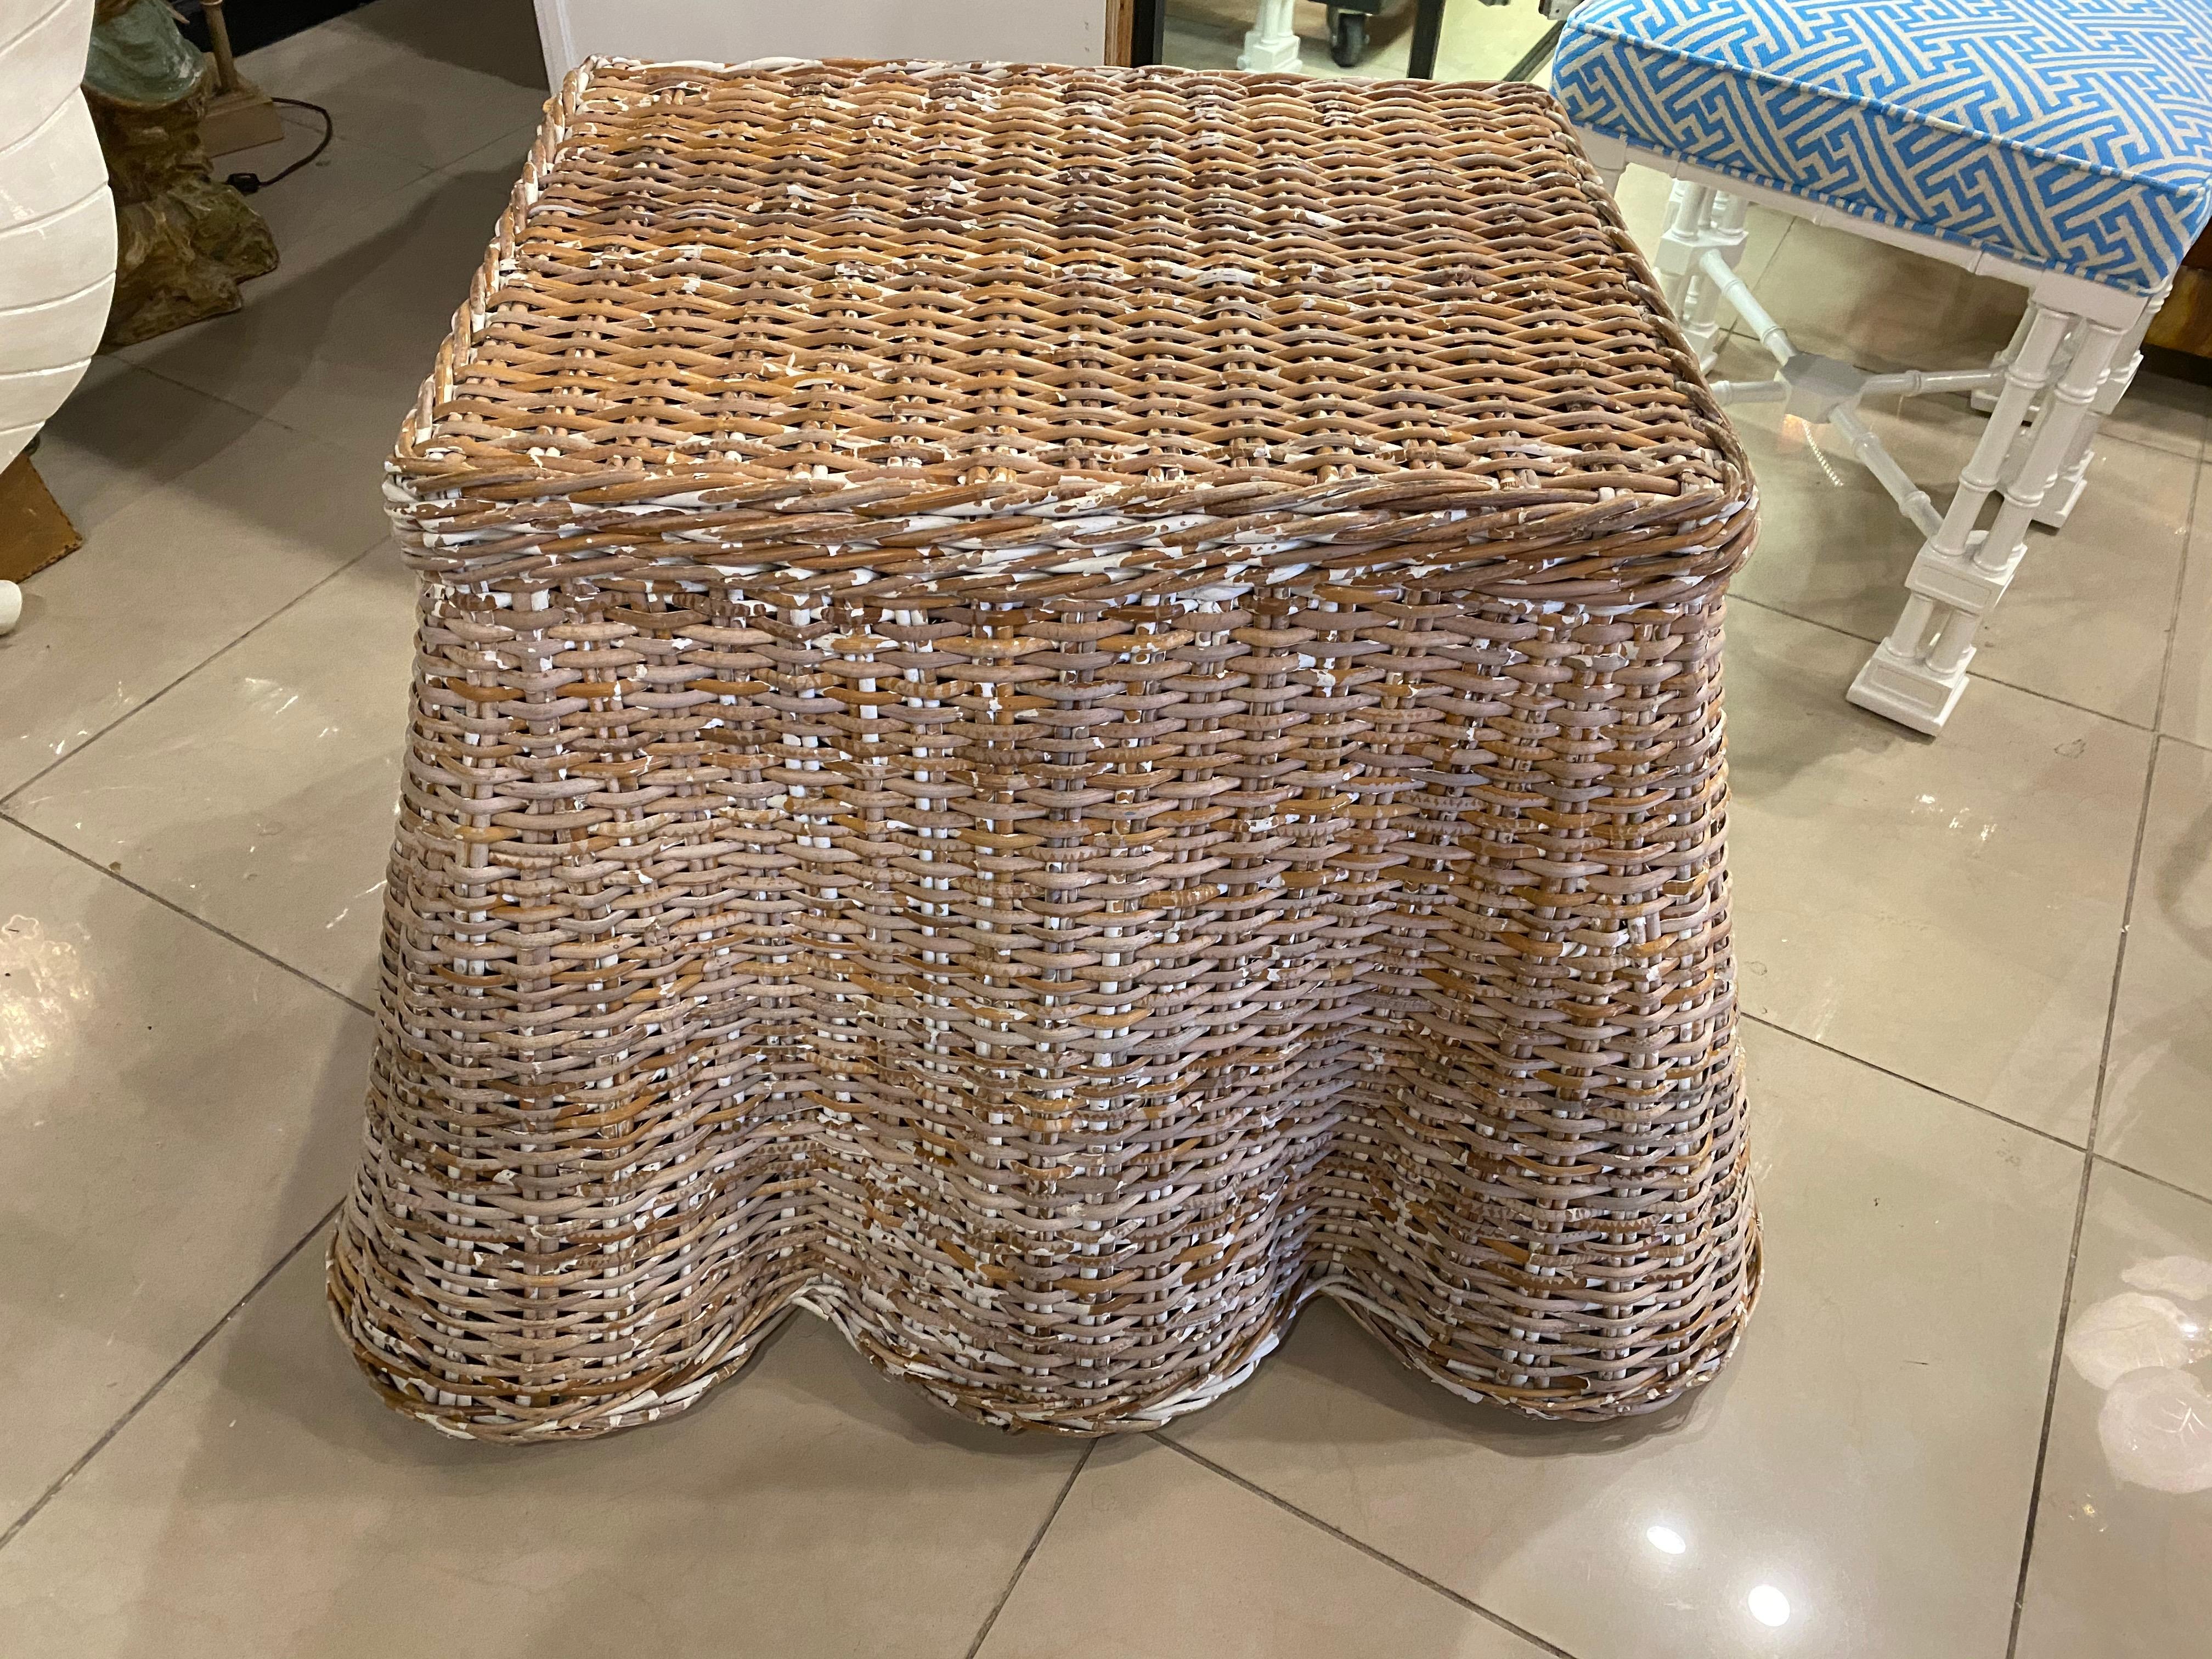 Lovely vintage draped wicker coffee cocktail table, end or side table. Very sturdy and well built. Original vintage wicker finish with some old chippy white paint that gives it a great aged, farmhouse look. No broken or missing wicker pieces.
Top